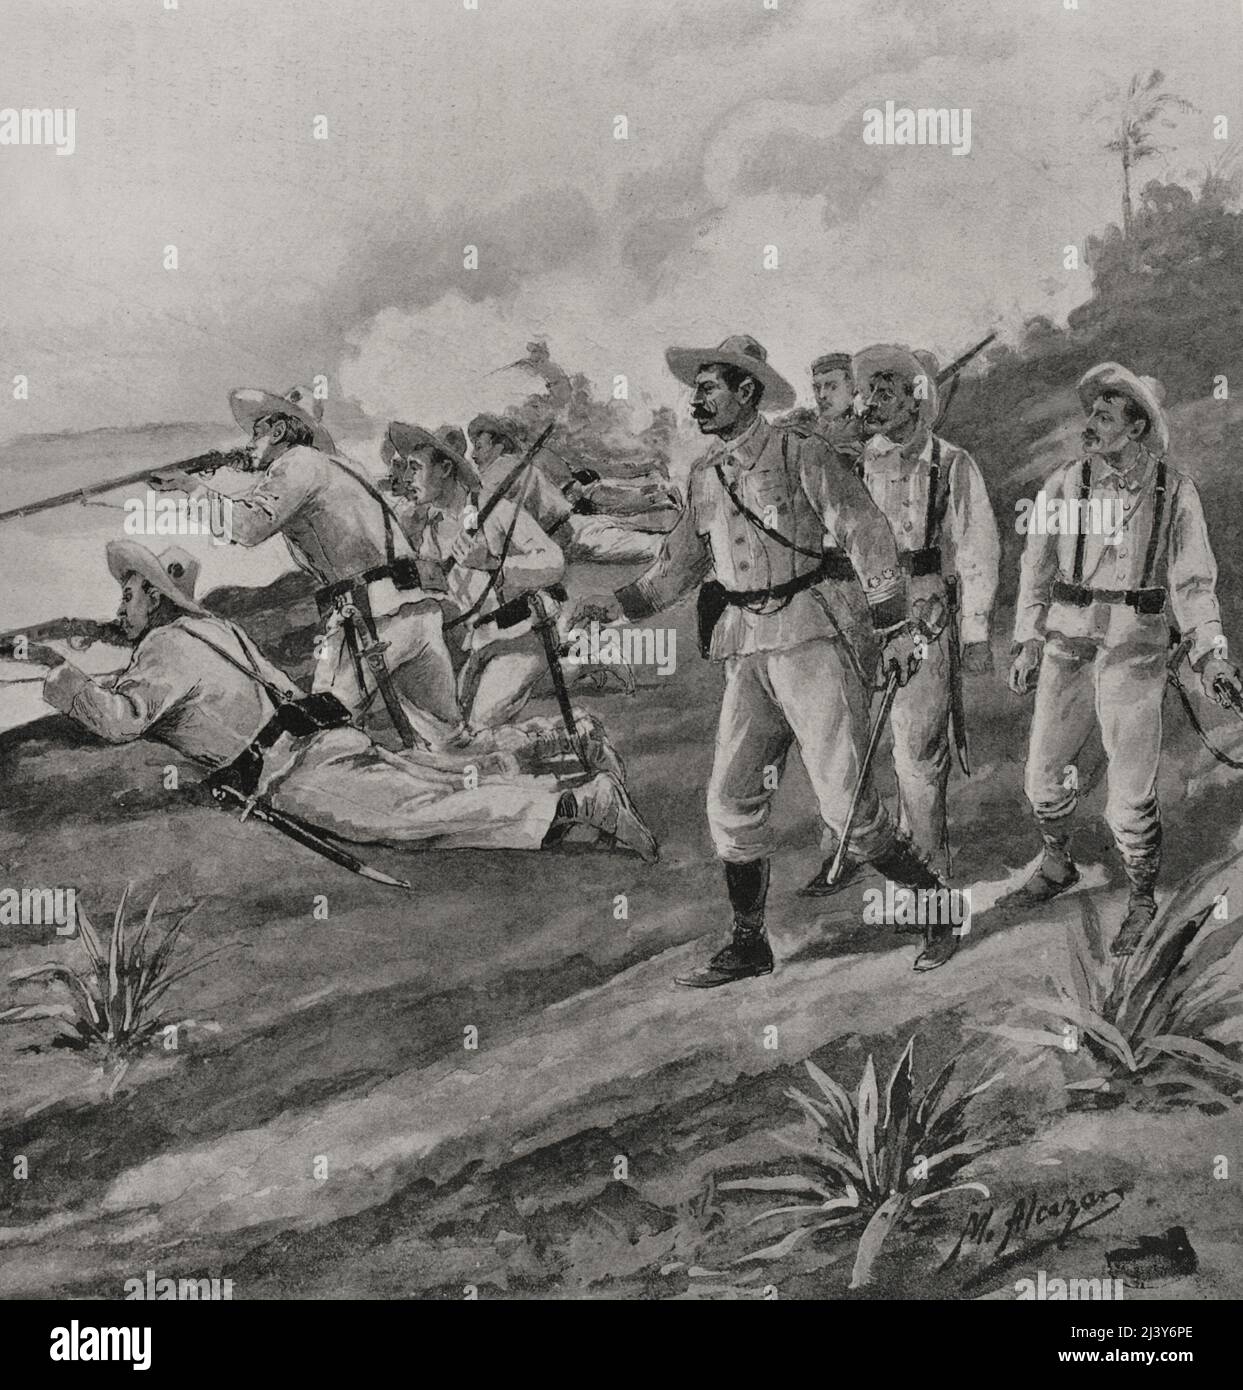 Spanish-American War. War conflict between Spain and the United States in 1898, the result of the North American intervention in the Cuban war of independence. Spanish soldiers rejecting the landing of US troops on the coast of Cienfuegos (Cuba). Illustration by M. Alcázar. Detail. Photoengraving by Laporta. La Ilustración Española y Americana, 1898. Stock Photo